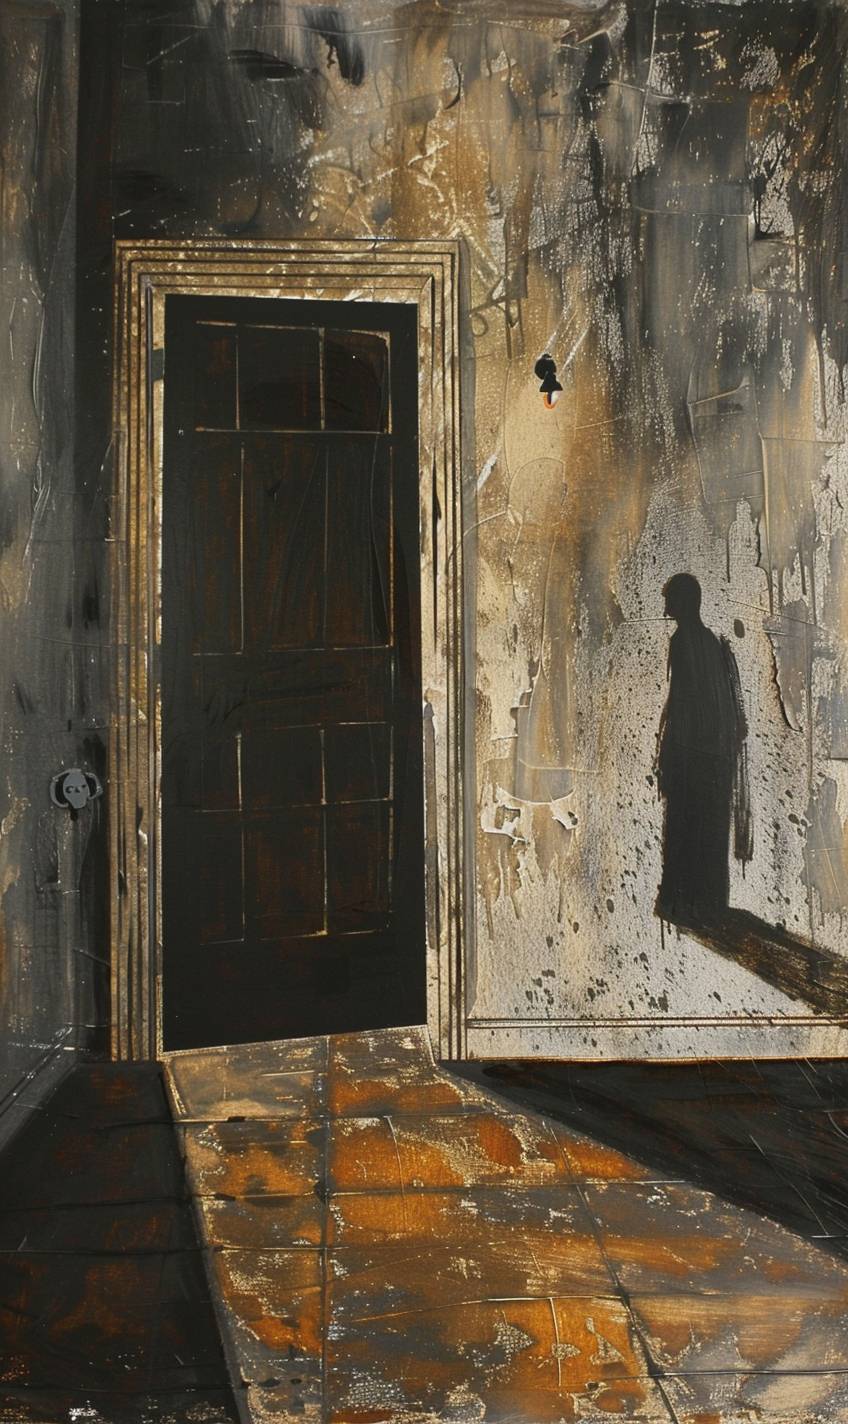 In style of Gary Bunt, Haunted mansion with creaking doors and shadows